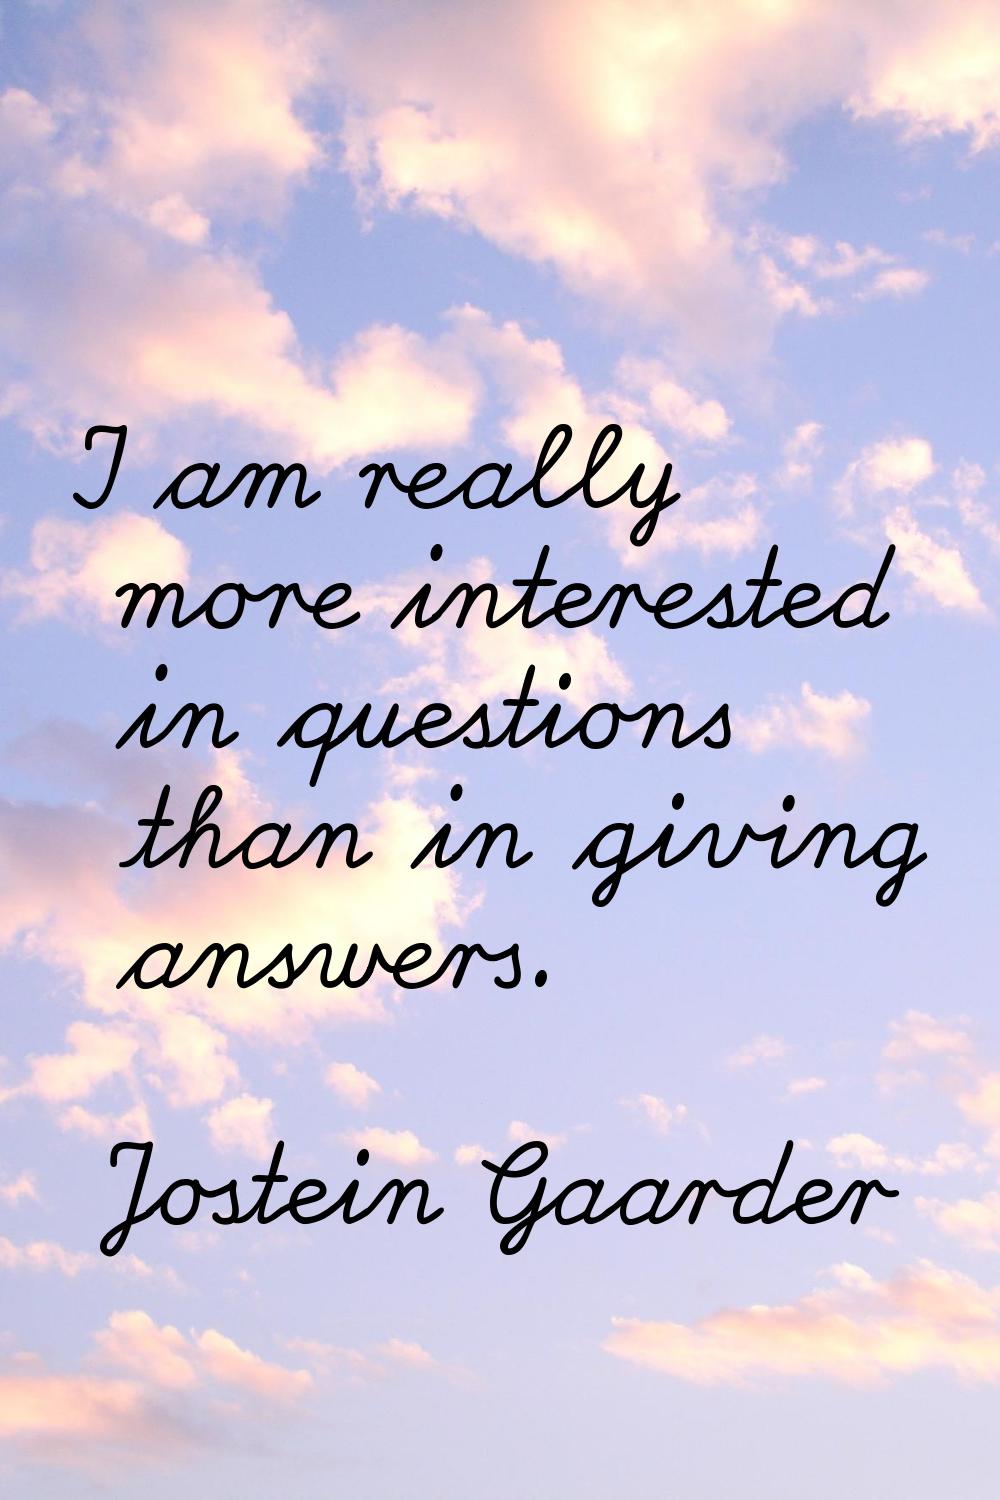 I am really more interested in questions than in giving answers.